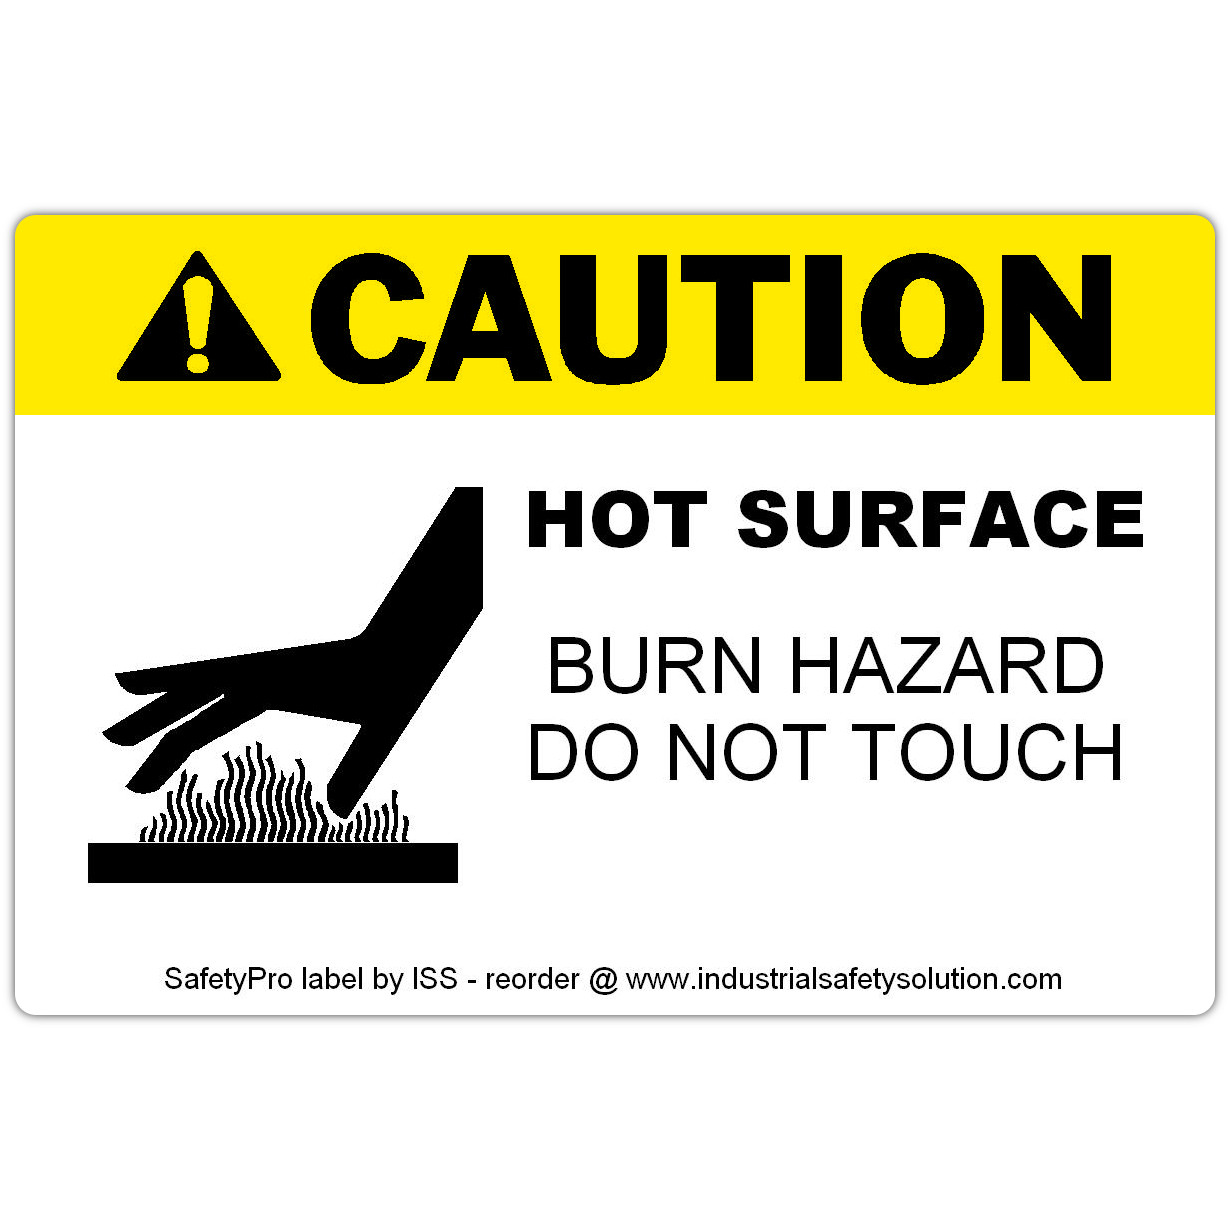 Detail view for 4" x 6" CAUTION Hot Surface Safety Label